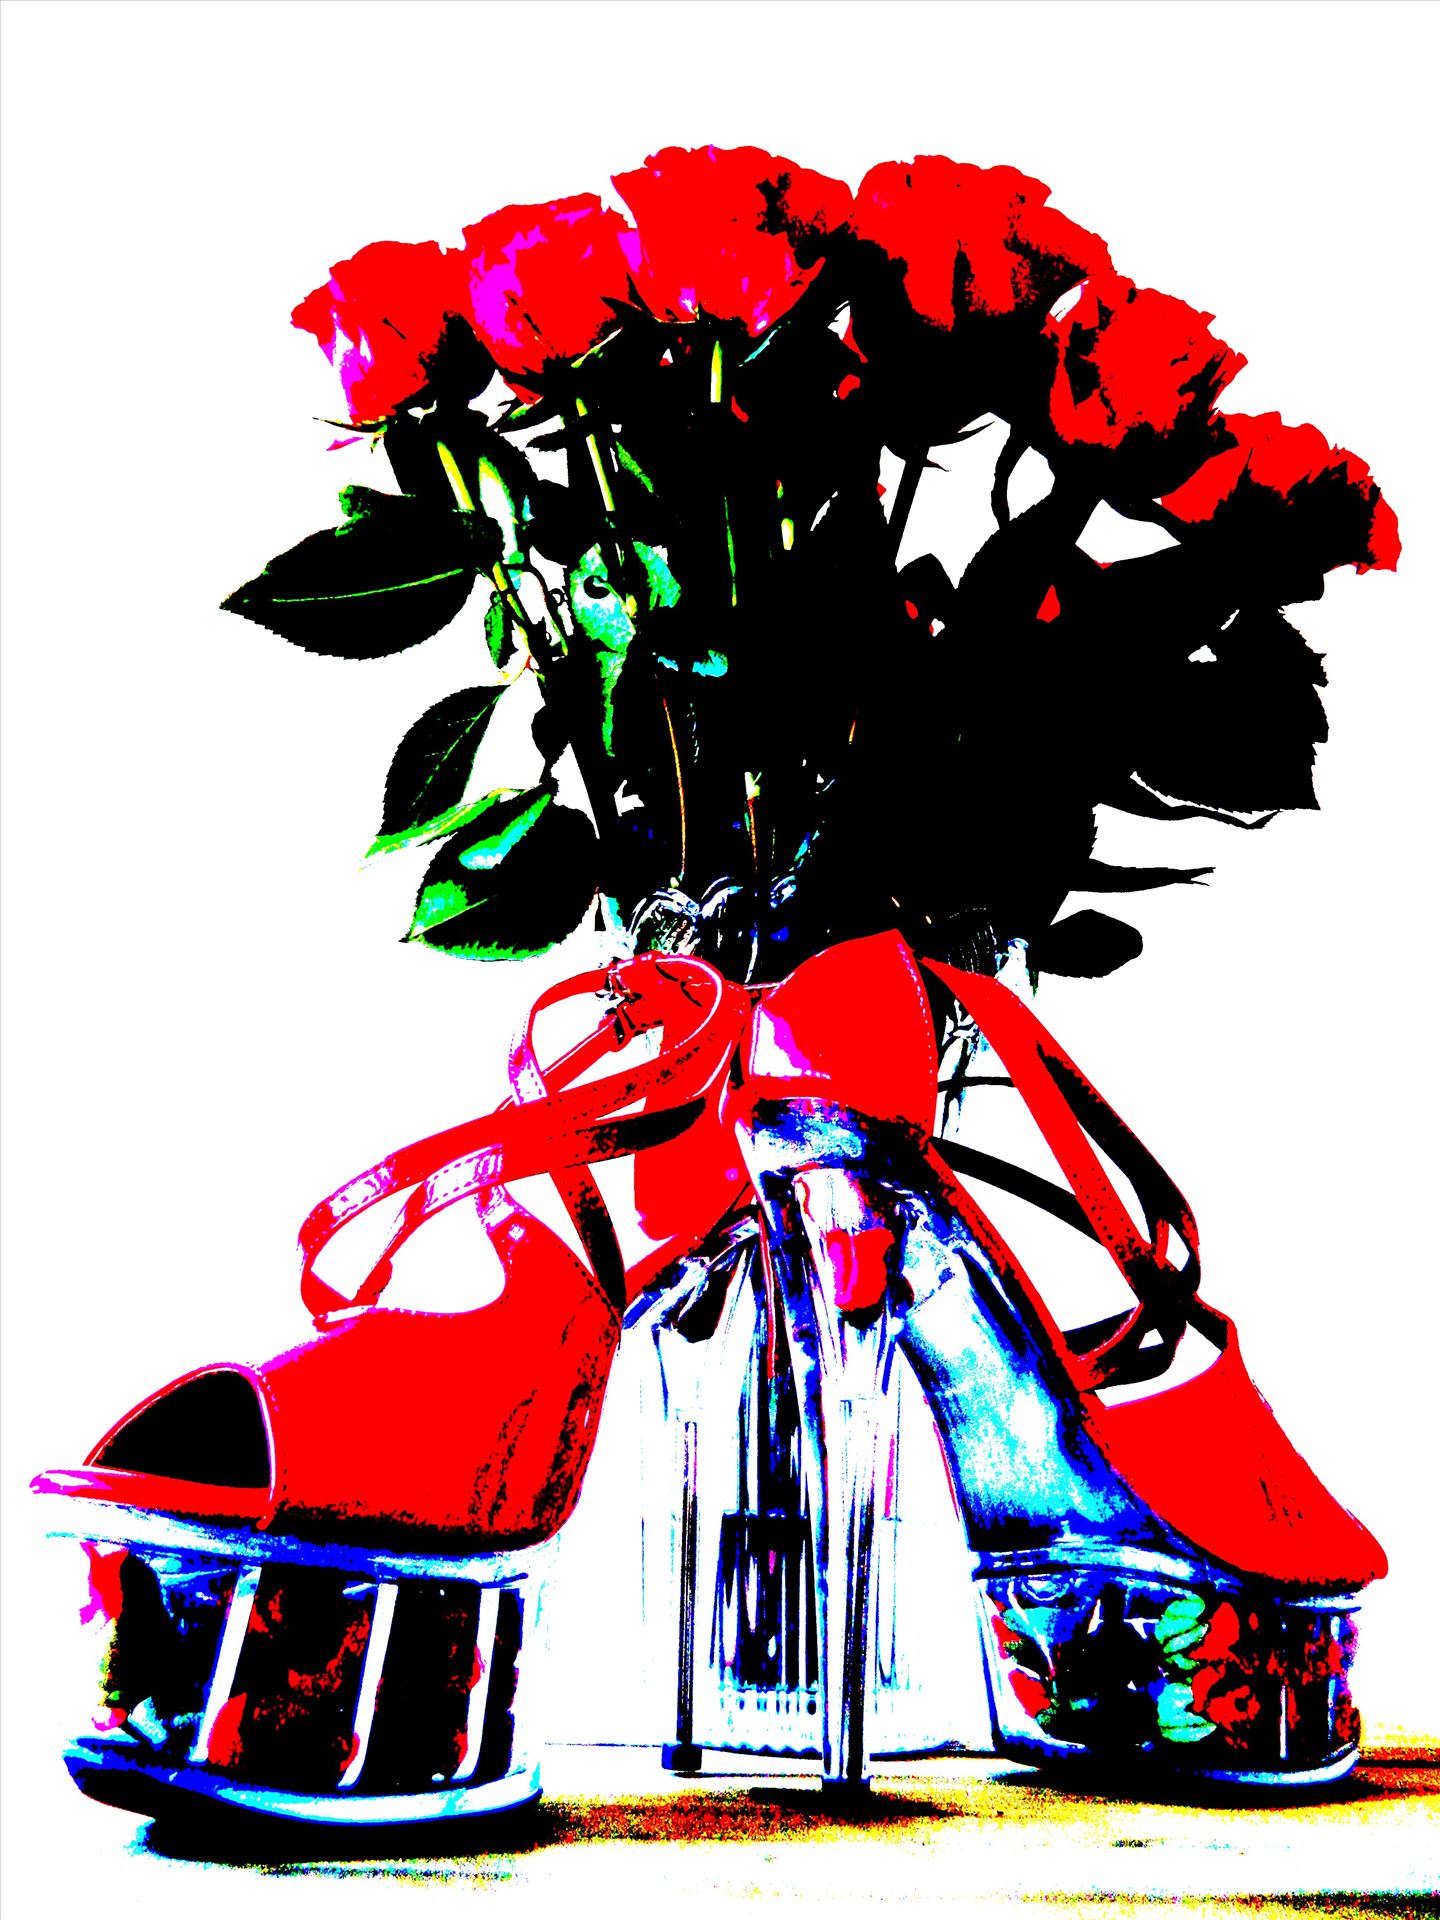 High Heels and Red Roses Pop Art Image of Red Roses and Red High Heel shoes by PopArtMediaProductions